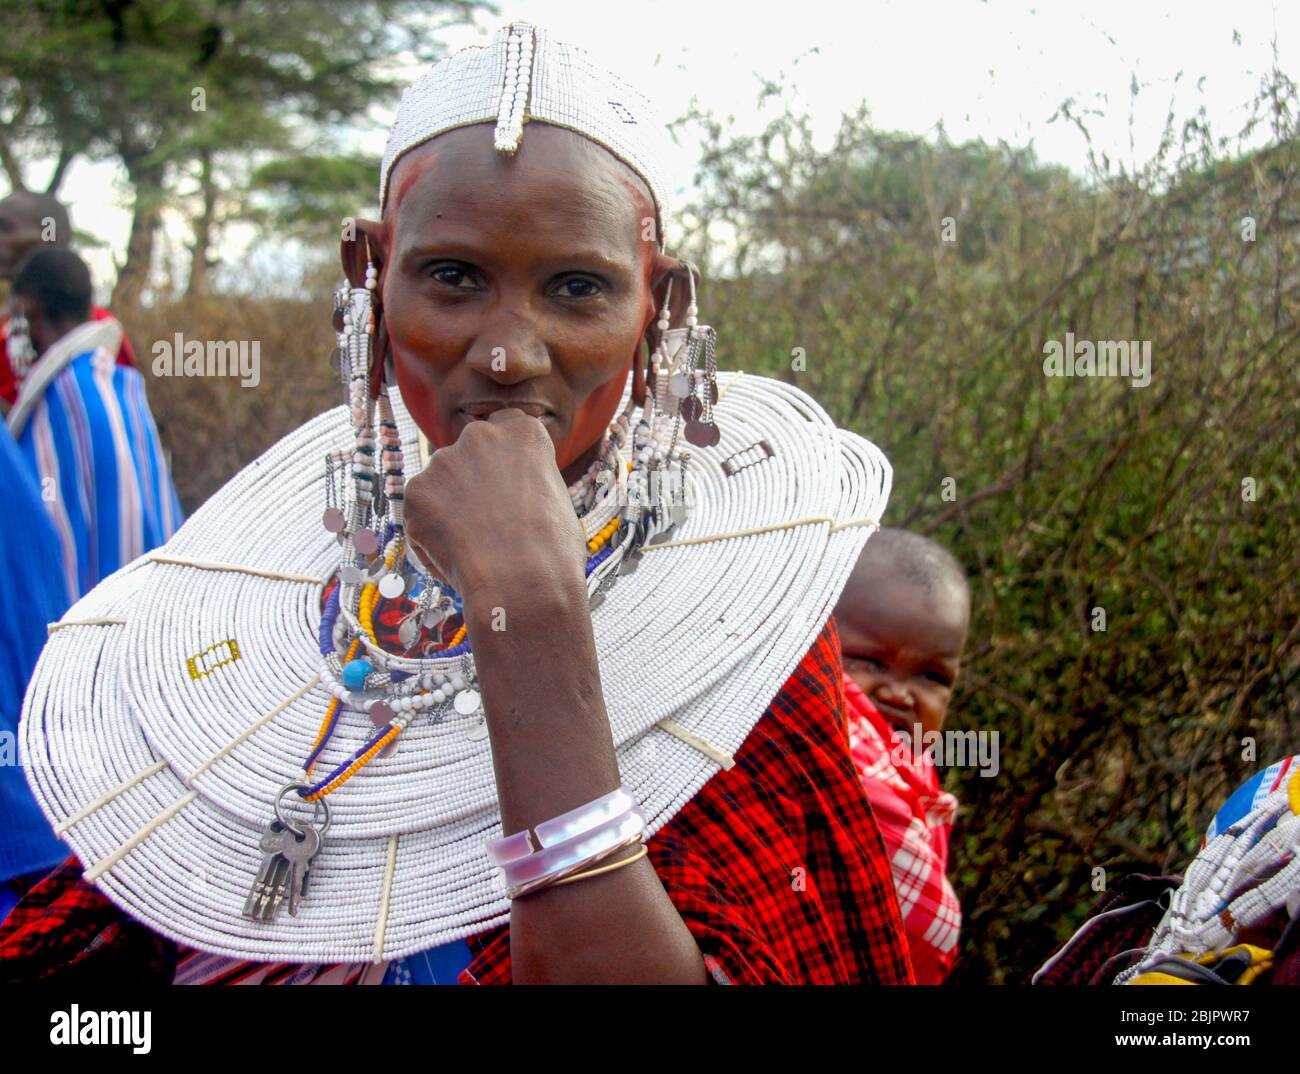 Maasai women in full traditional party outfit, wearing Maasai jewelry. Maasai is an ethnic group of semi-nomadic people Photographed in Tanzania Stock Photo